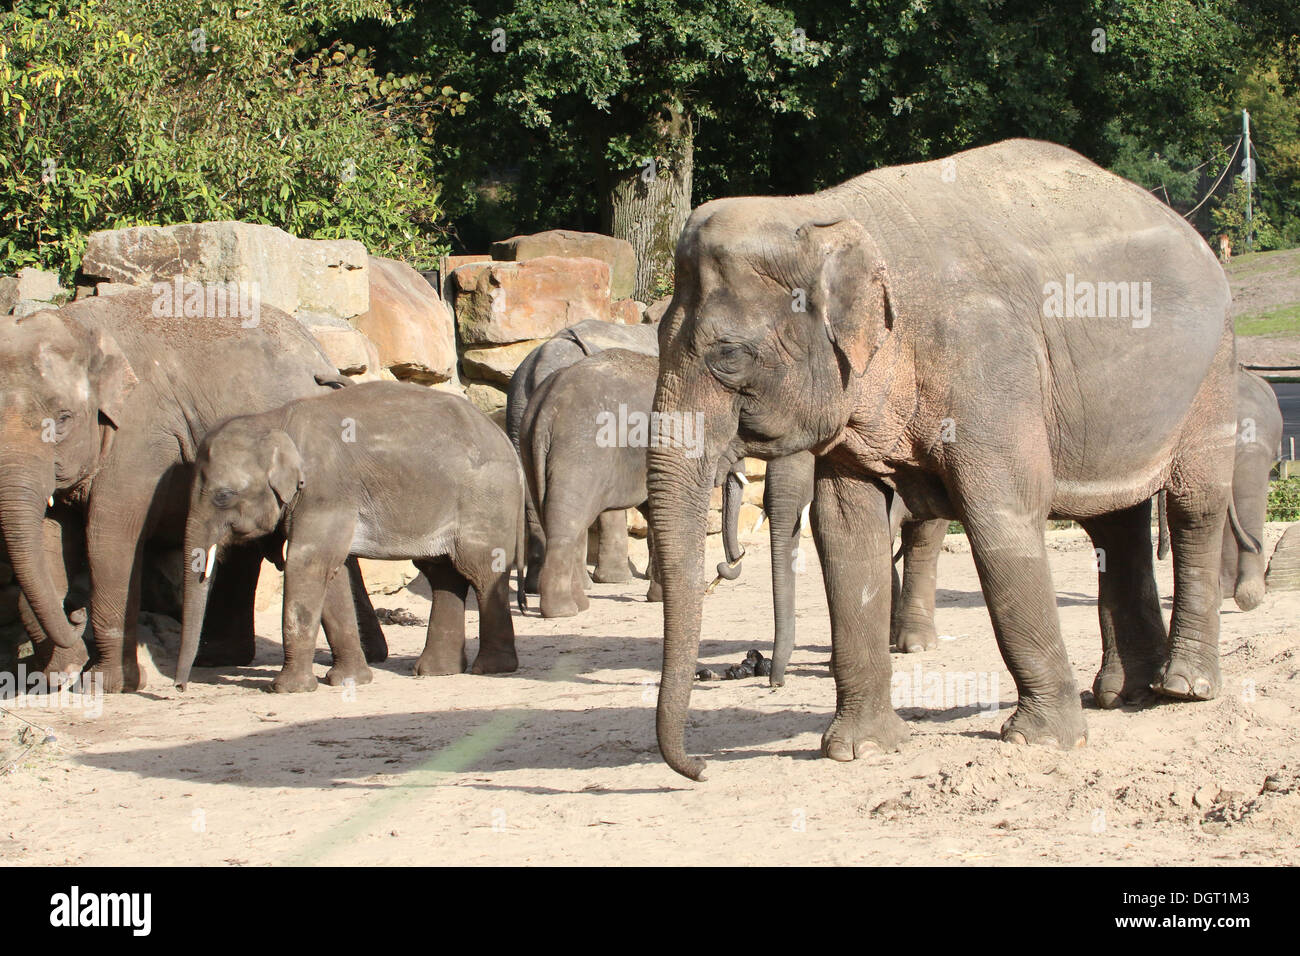 Group of Asian elephants (Elephas maximus) in a natural setting Stock Photo